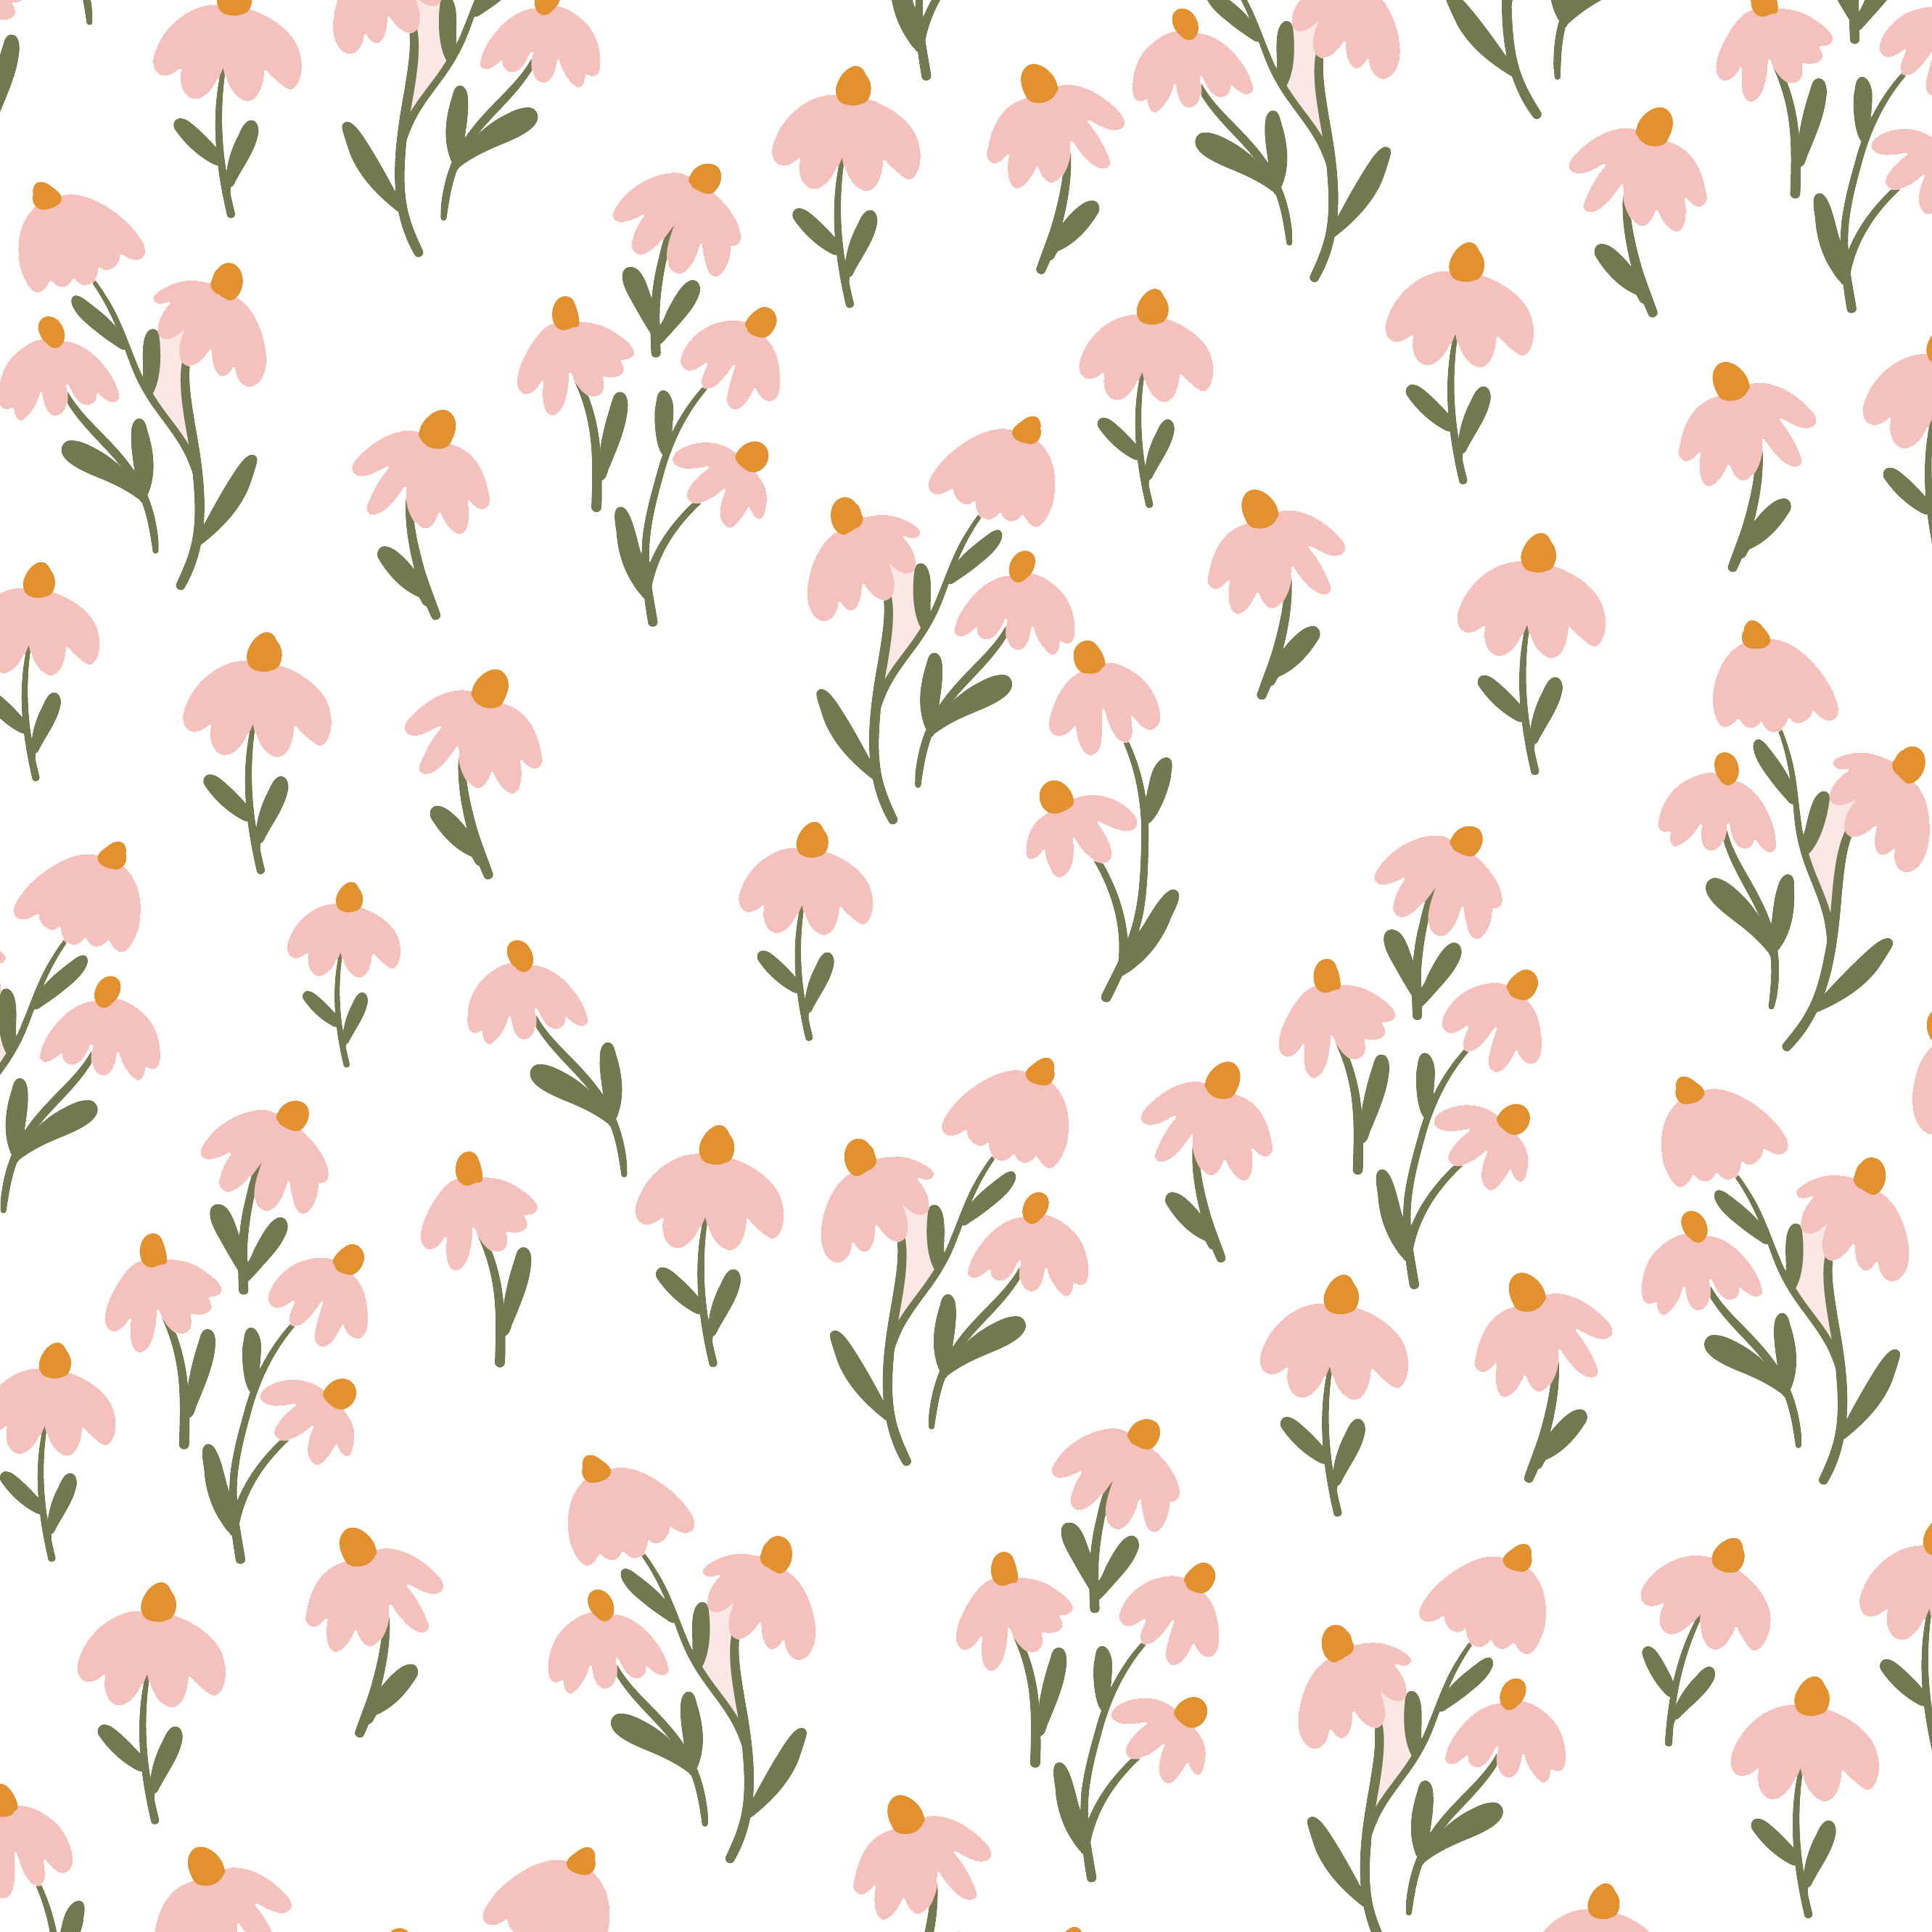 A seamless pattern of pink flowers with lush green stems against a white background, the Floral Love Wallpaper- Pink evokes a fresh and cheerful springtime garden.